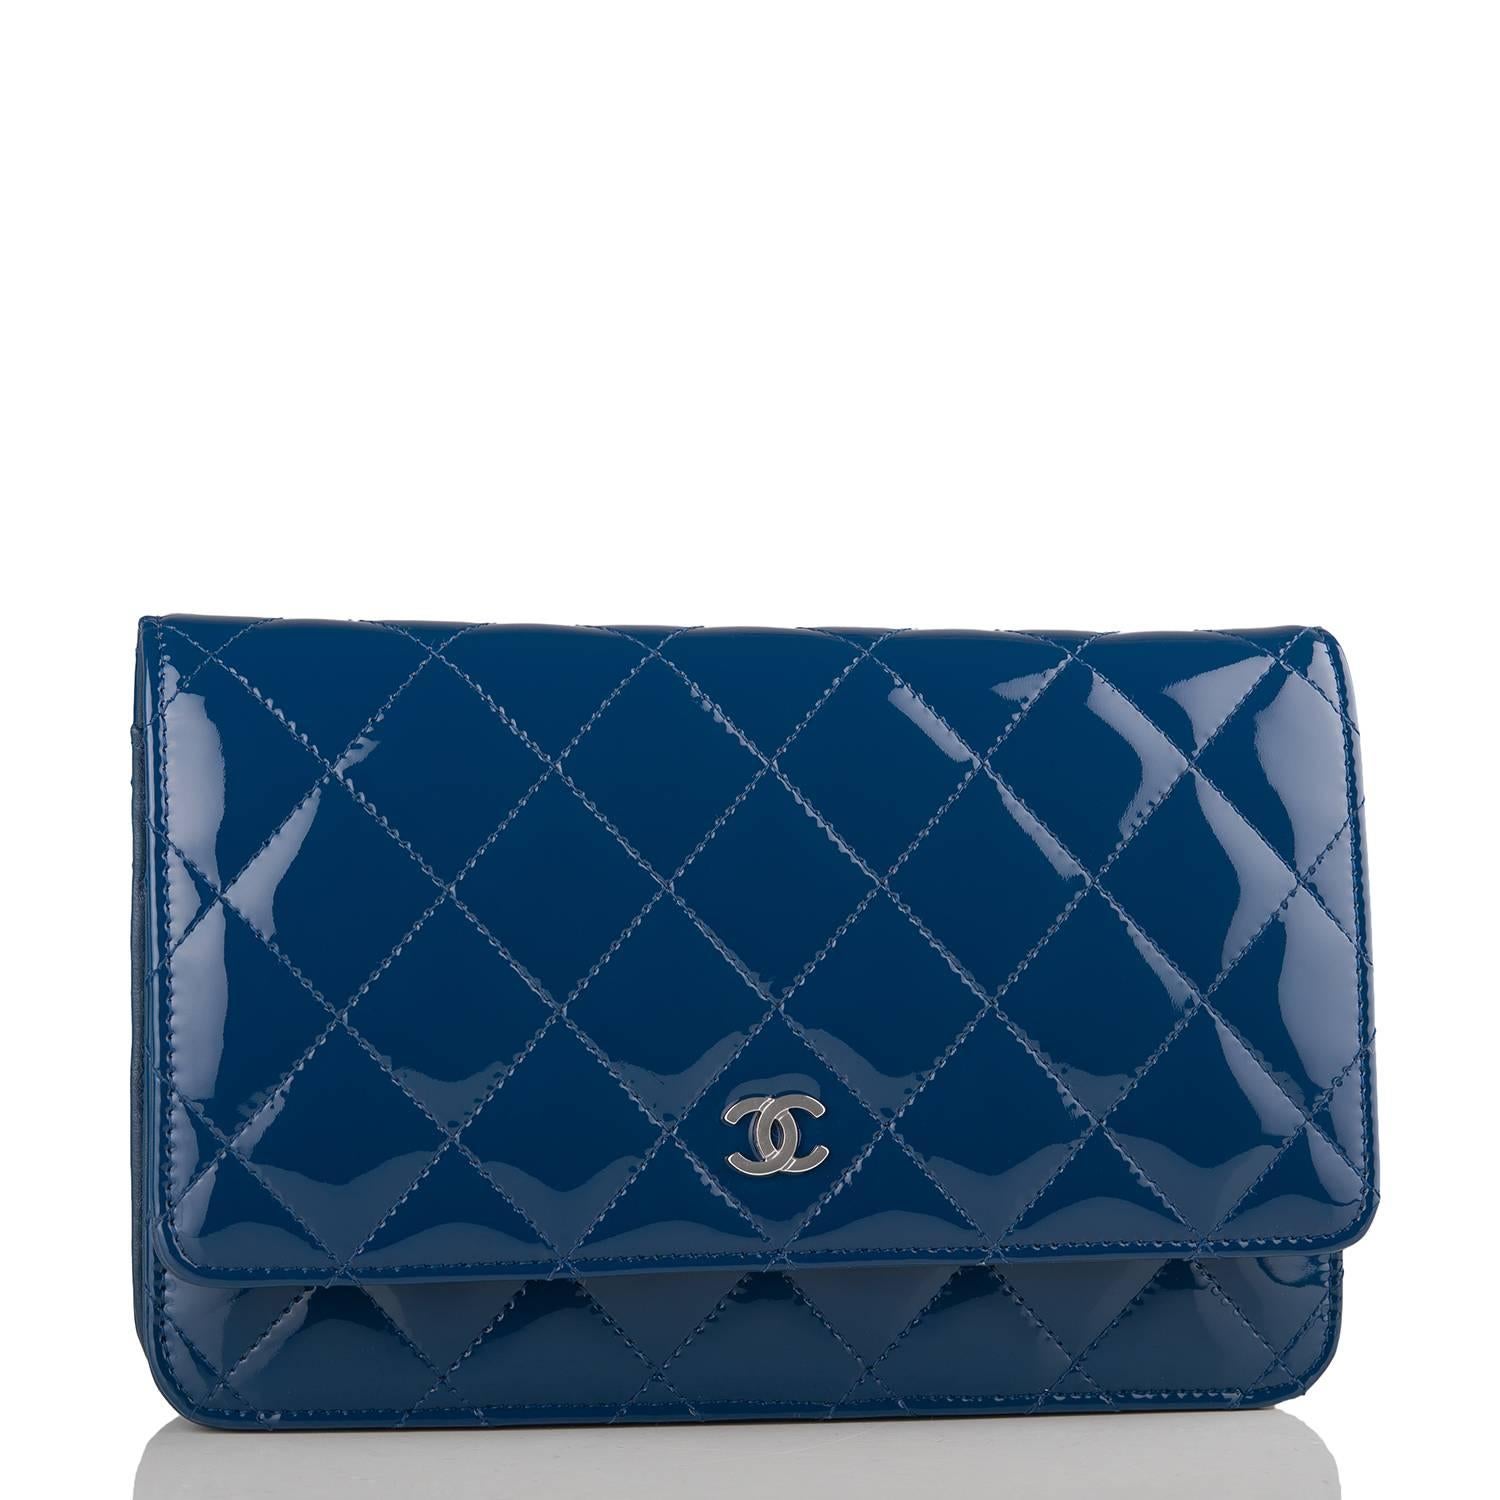 Chanel Classic Wallet On Chain (WOC) of dark blue patent leather with silver tone hardware.

This Wallet On Chain features signature Chanel quilting, a front flap with CC charm and hidden snap closure, a half moon rear pocket, and an interwoven